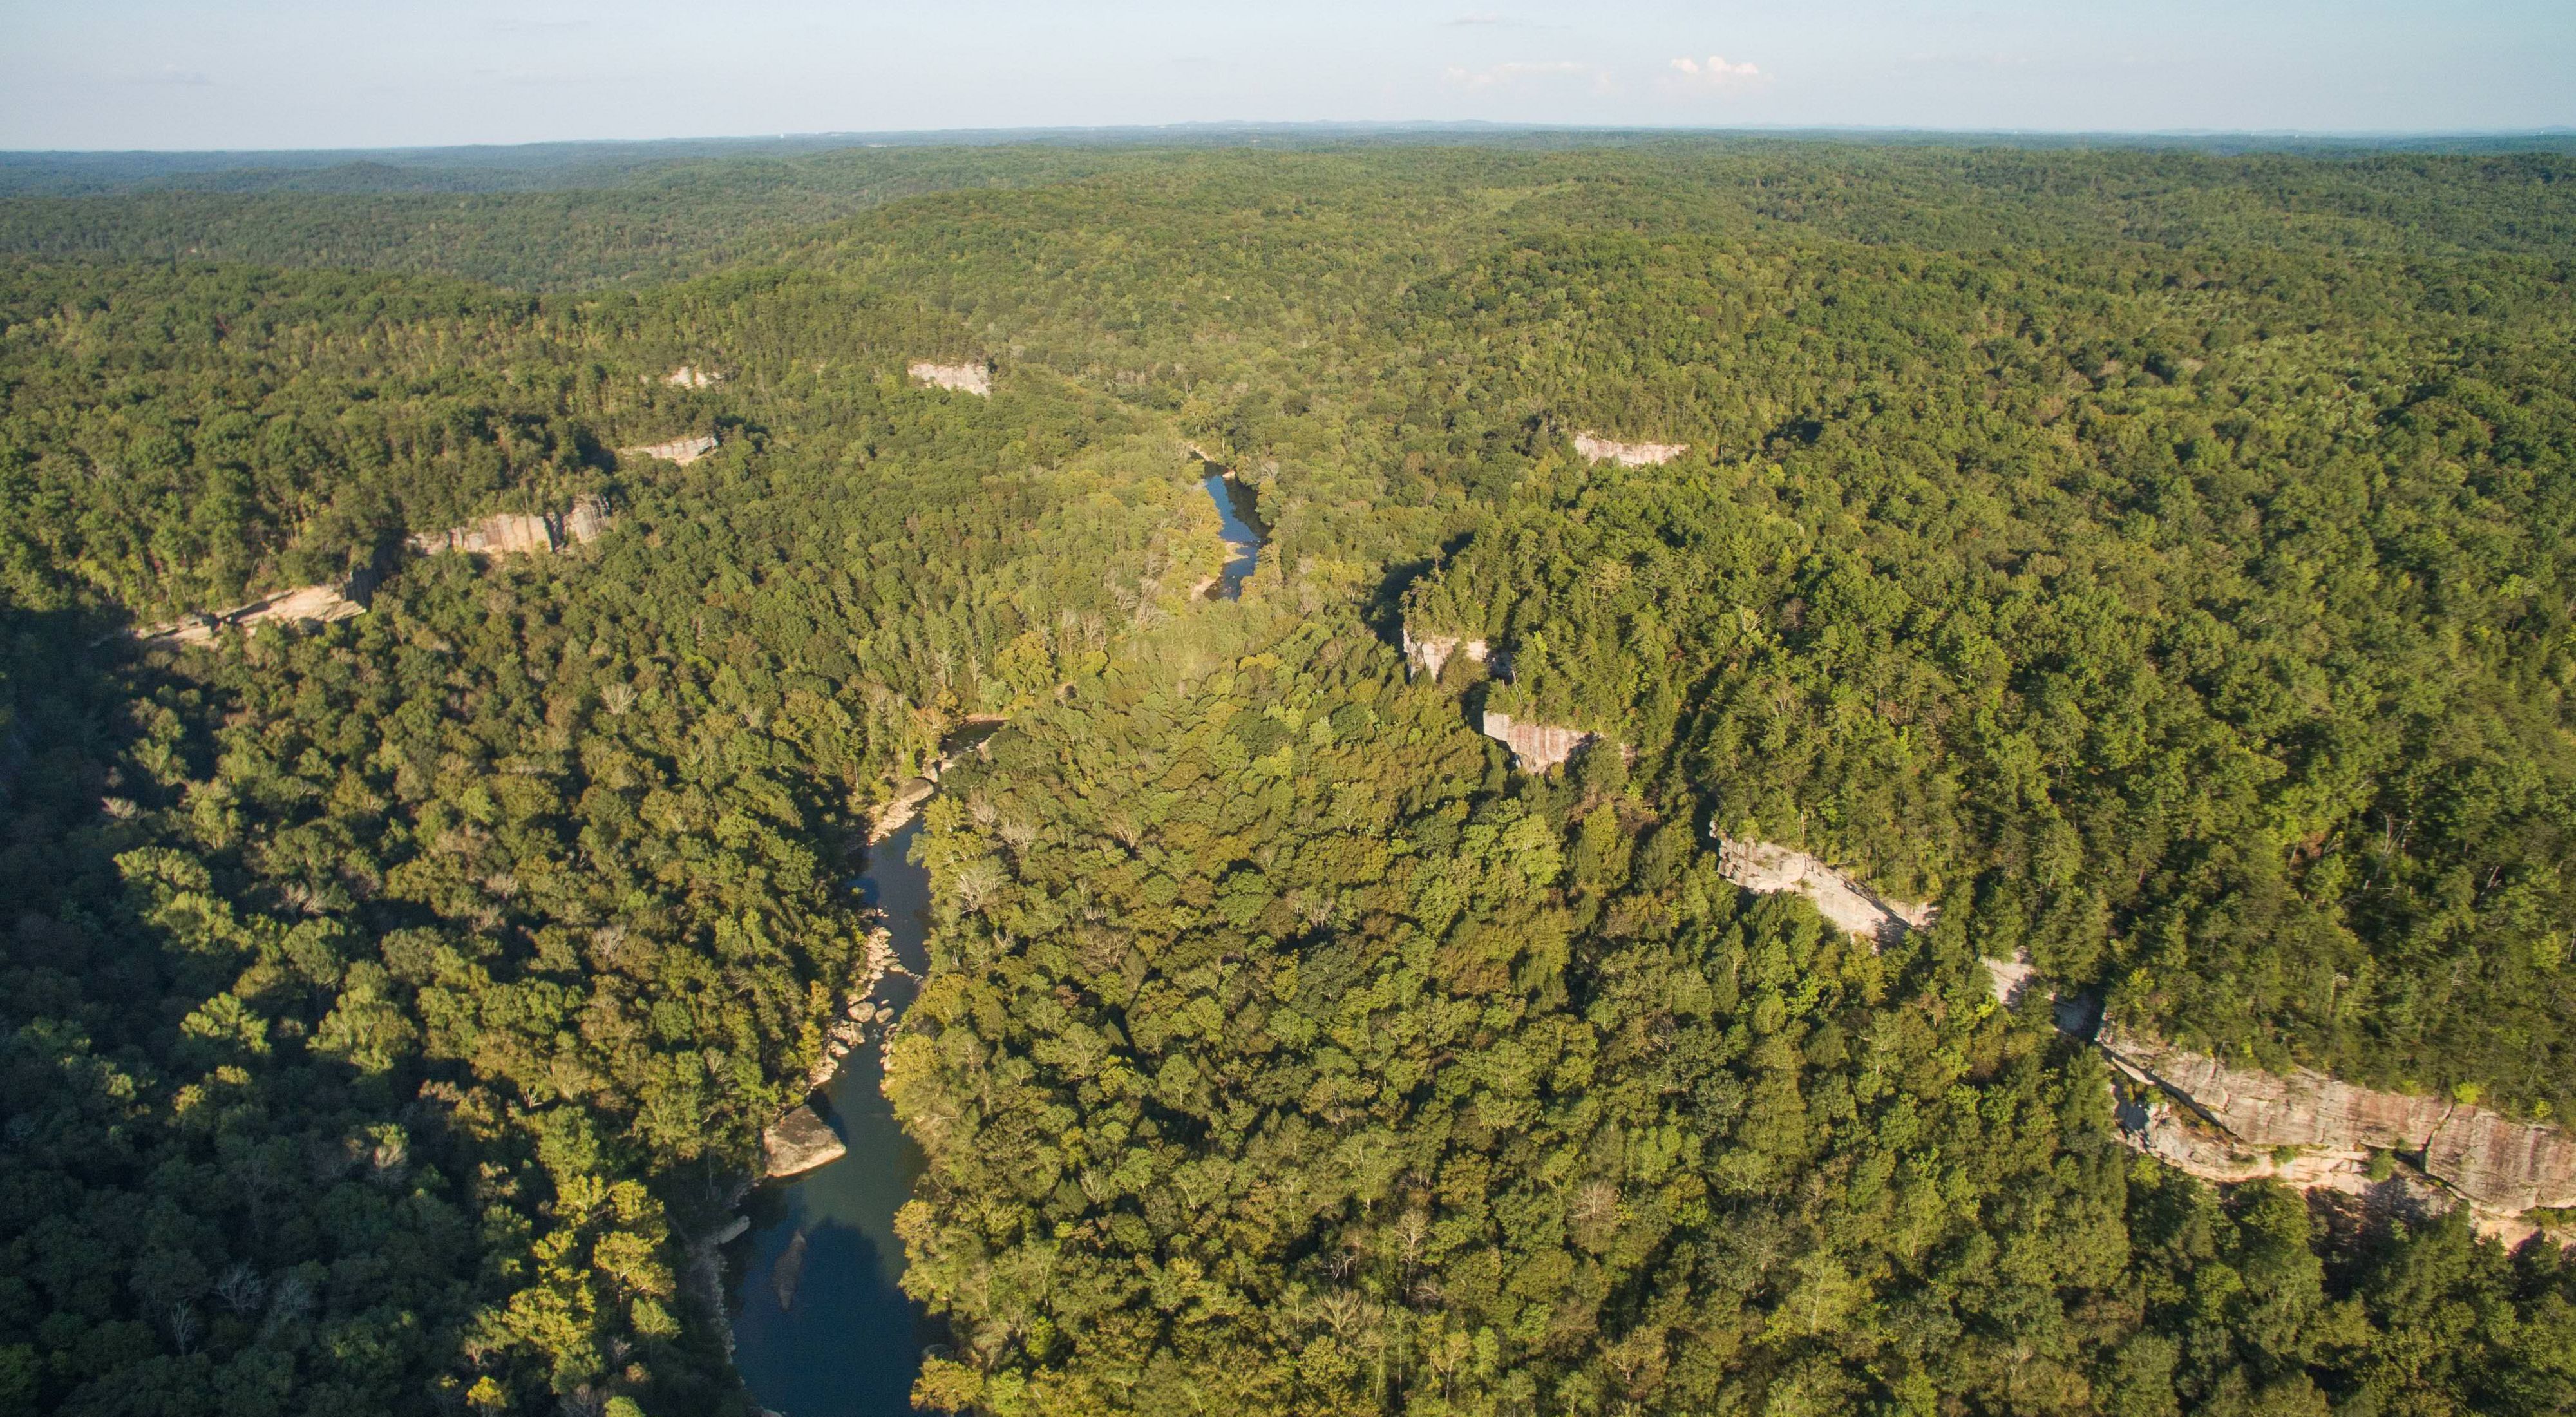 Image of the Rockcastle River surrounded by forestland.